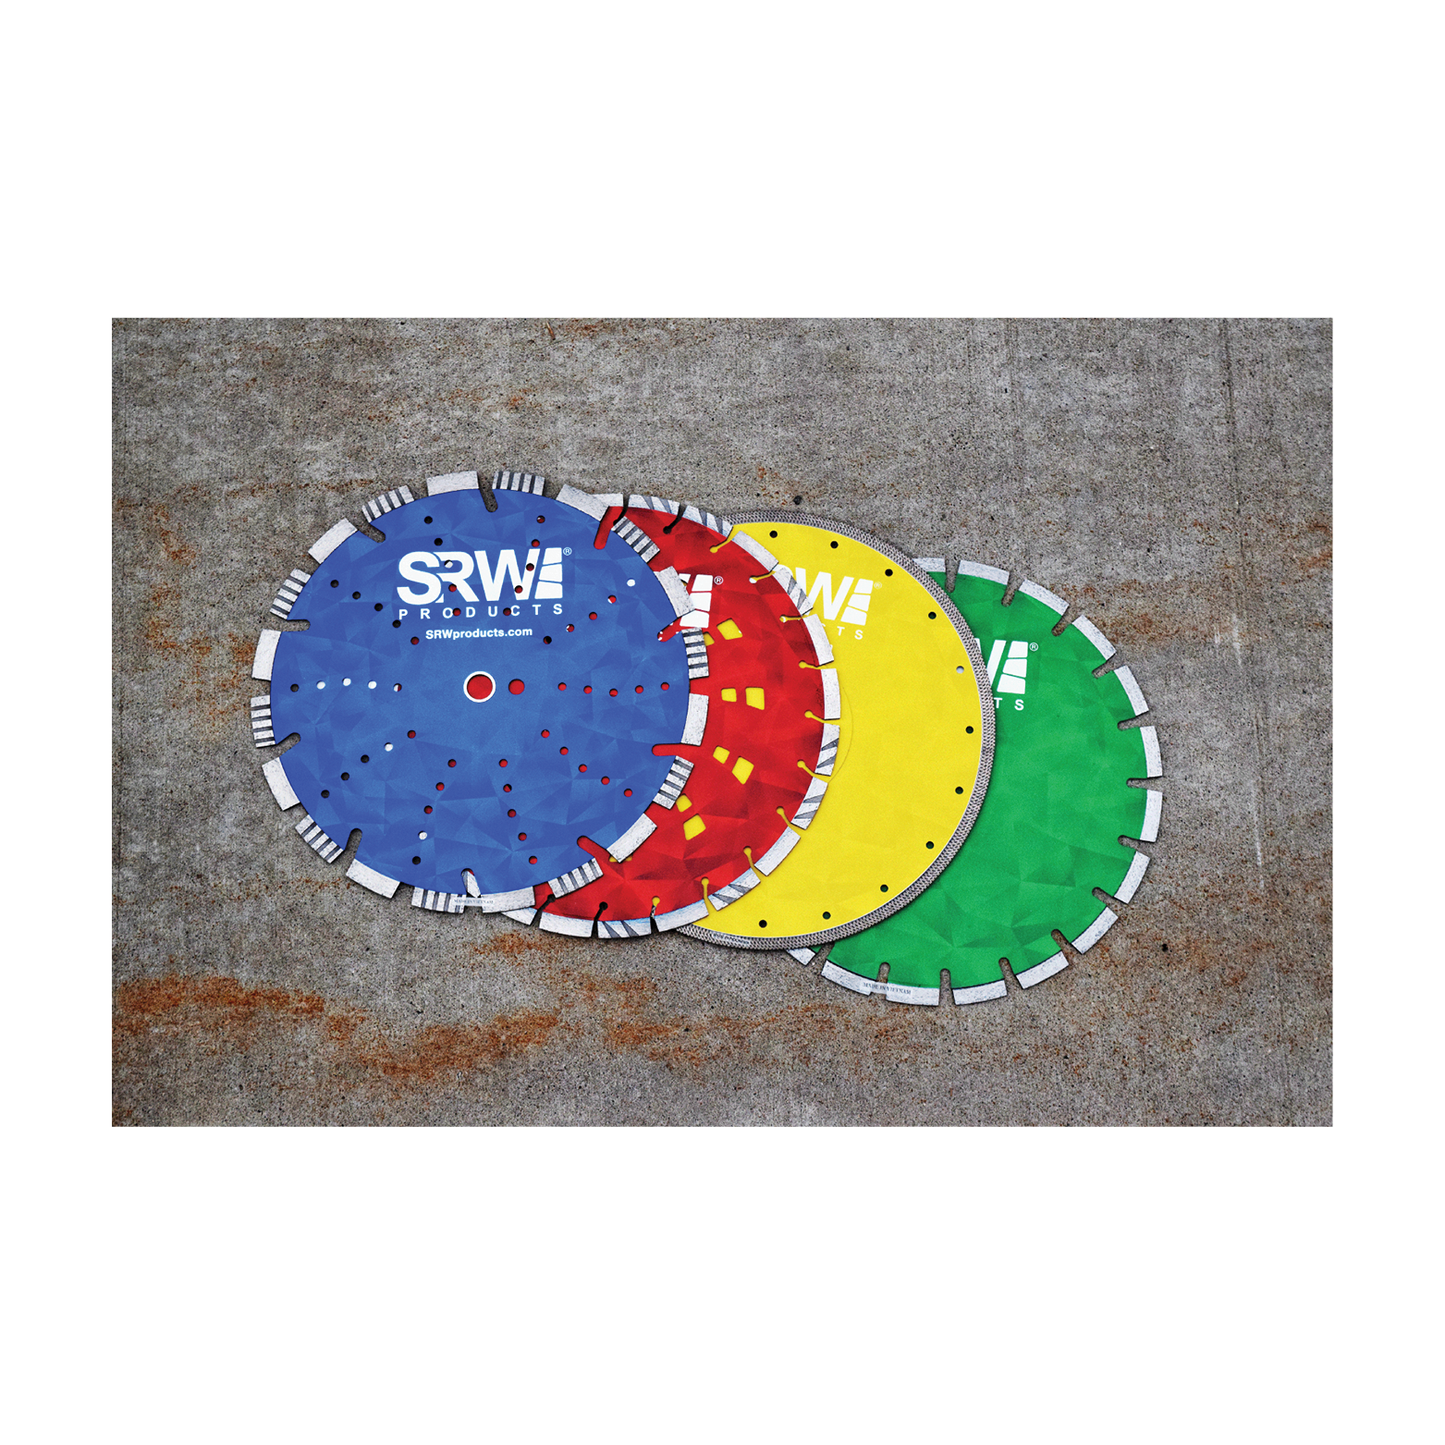 different types of diamond blades from srw products